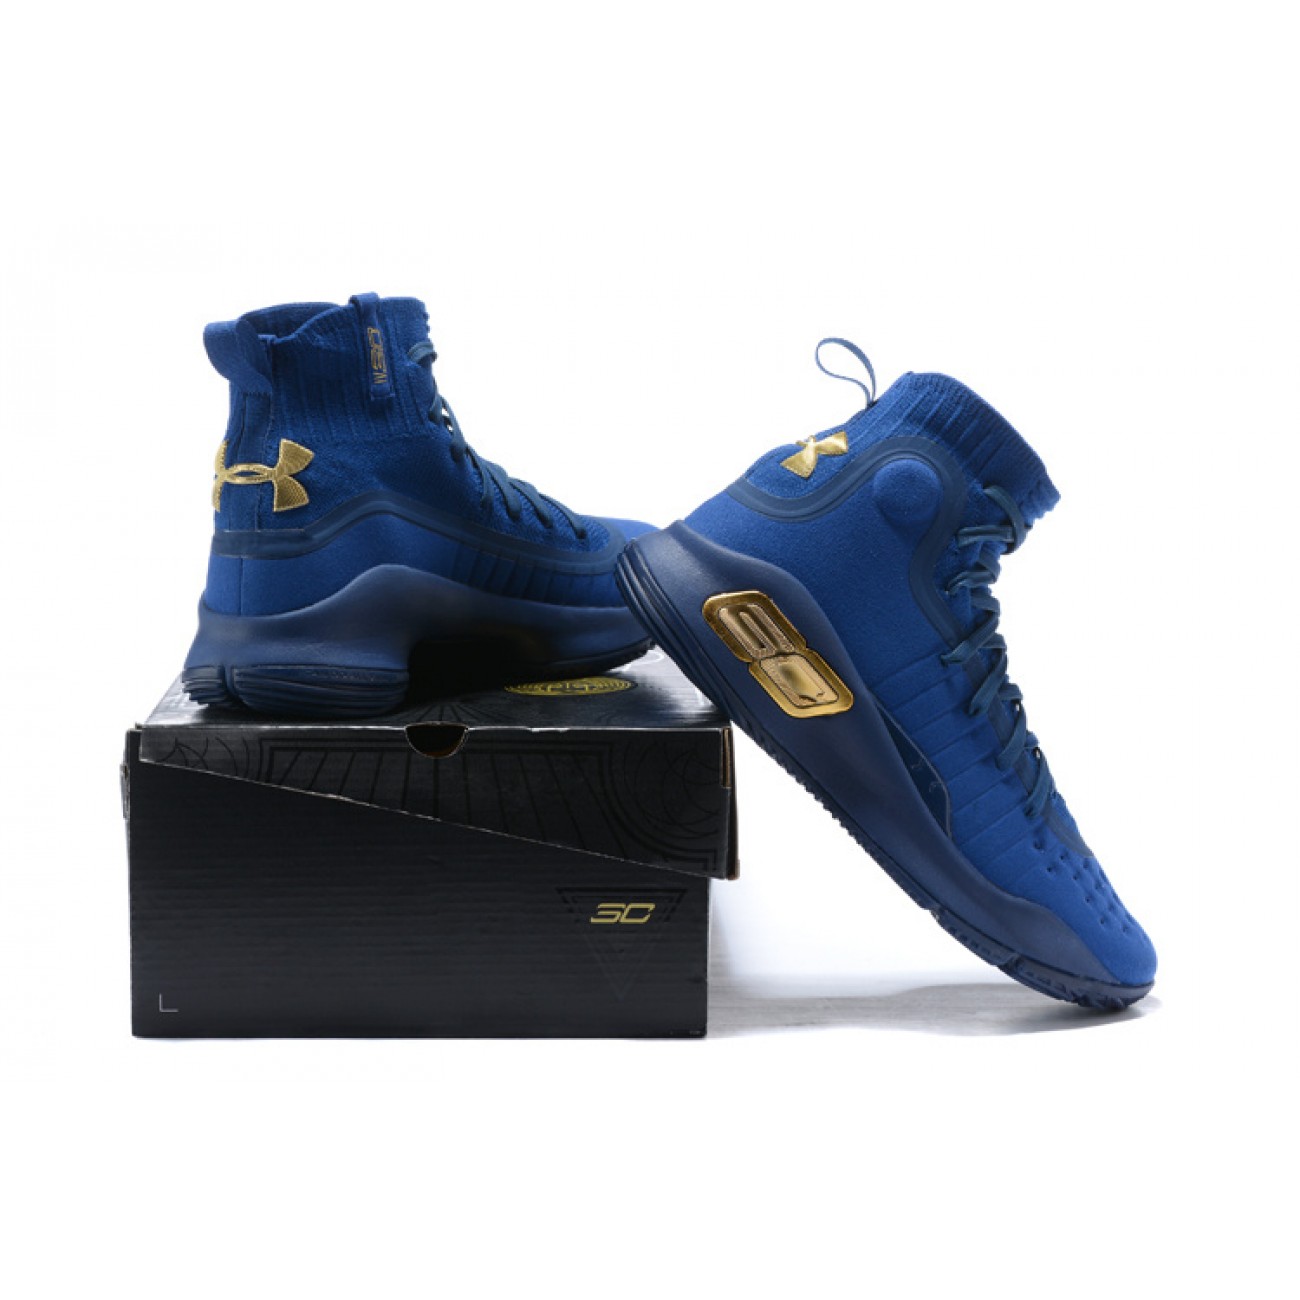 Under Armour UA Curry 4 "The Philippines" Deep Blue/Gold